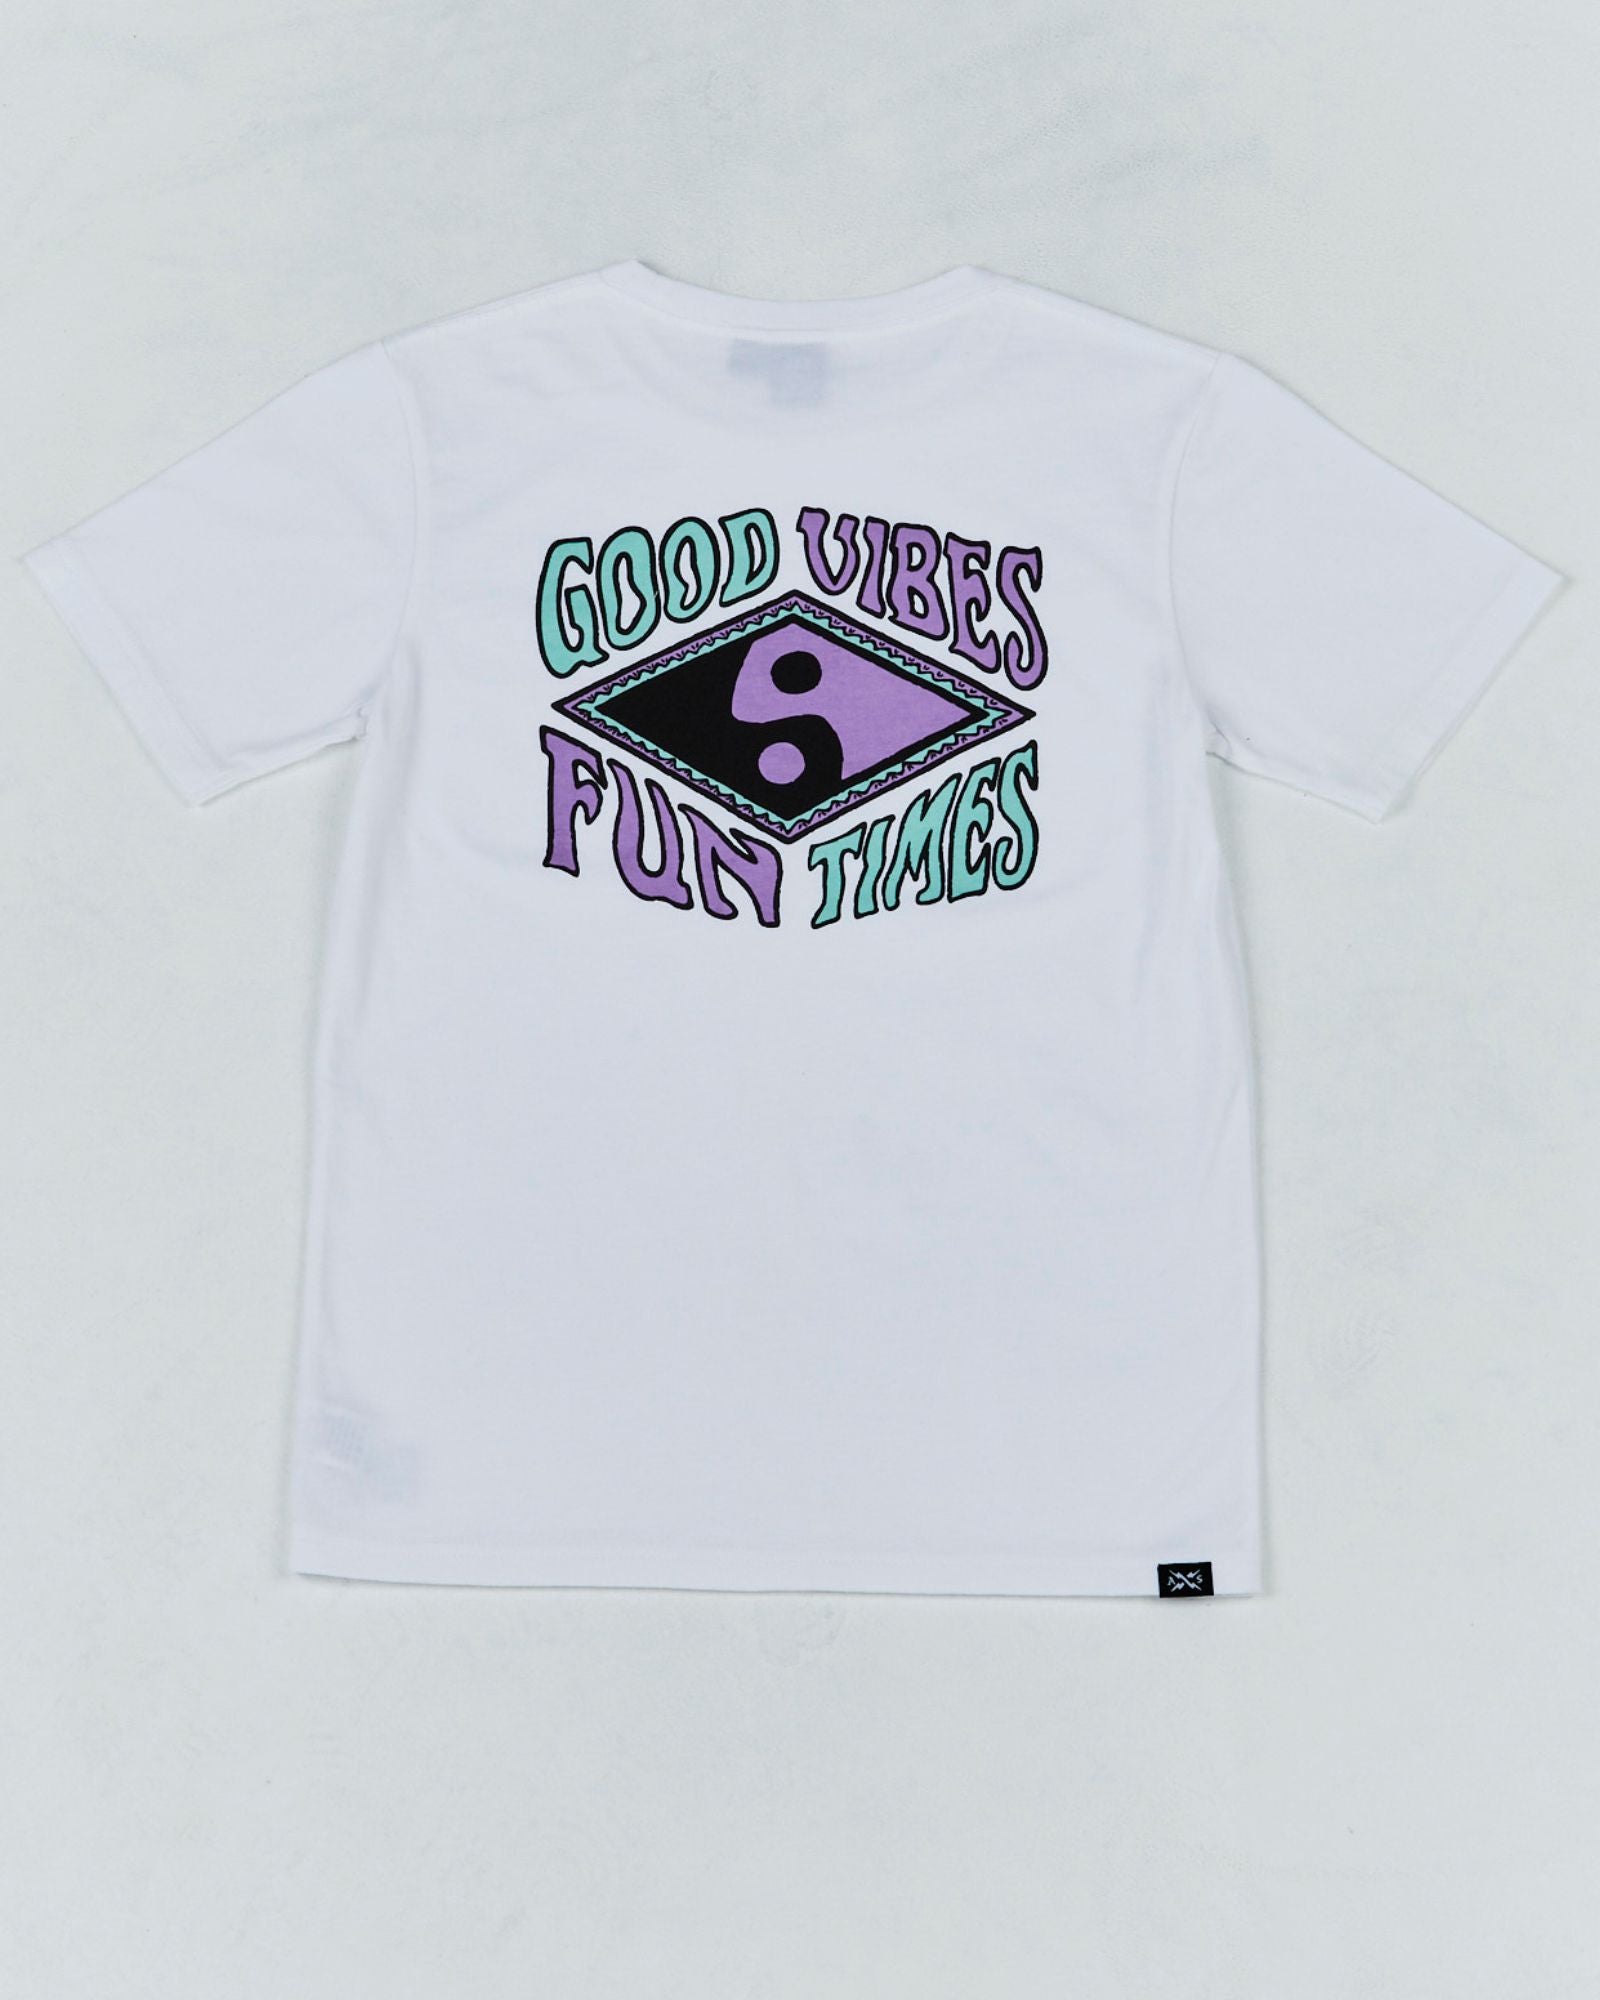 Kids' Good Vibes Tee by Alphabet Soup! For boys aged 2-7. Featuring 100% white cotton jersey, “Good Vibes, Fun Times” retro surf prints on chest and back in purple and blues, reg. fit, straight hem, short sleeves and ribbed crew neck.